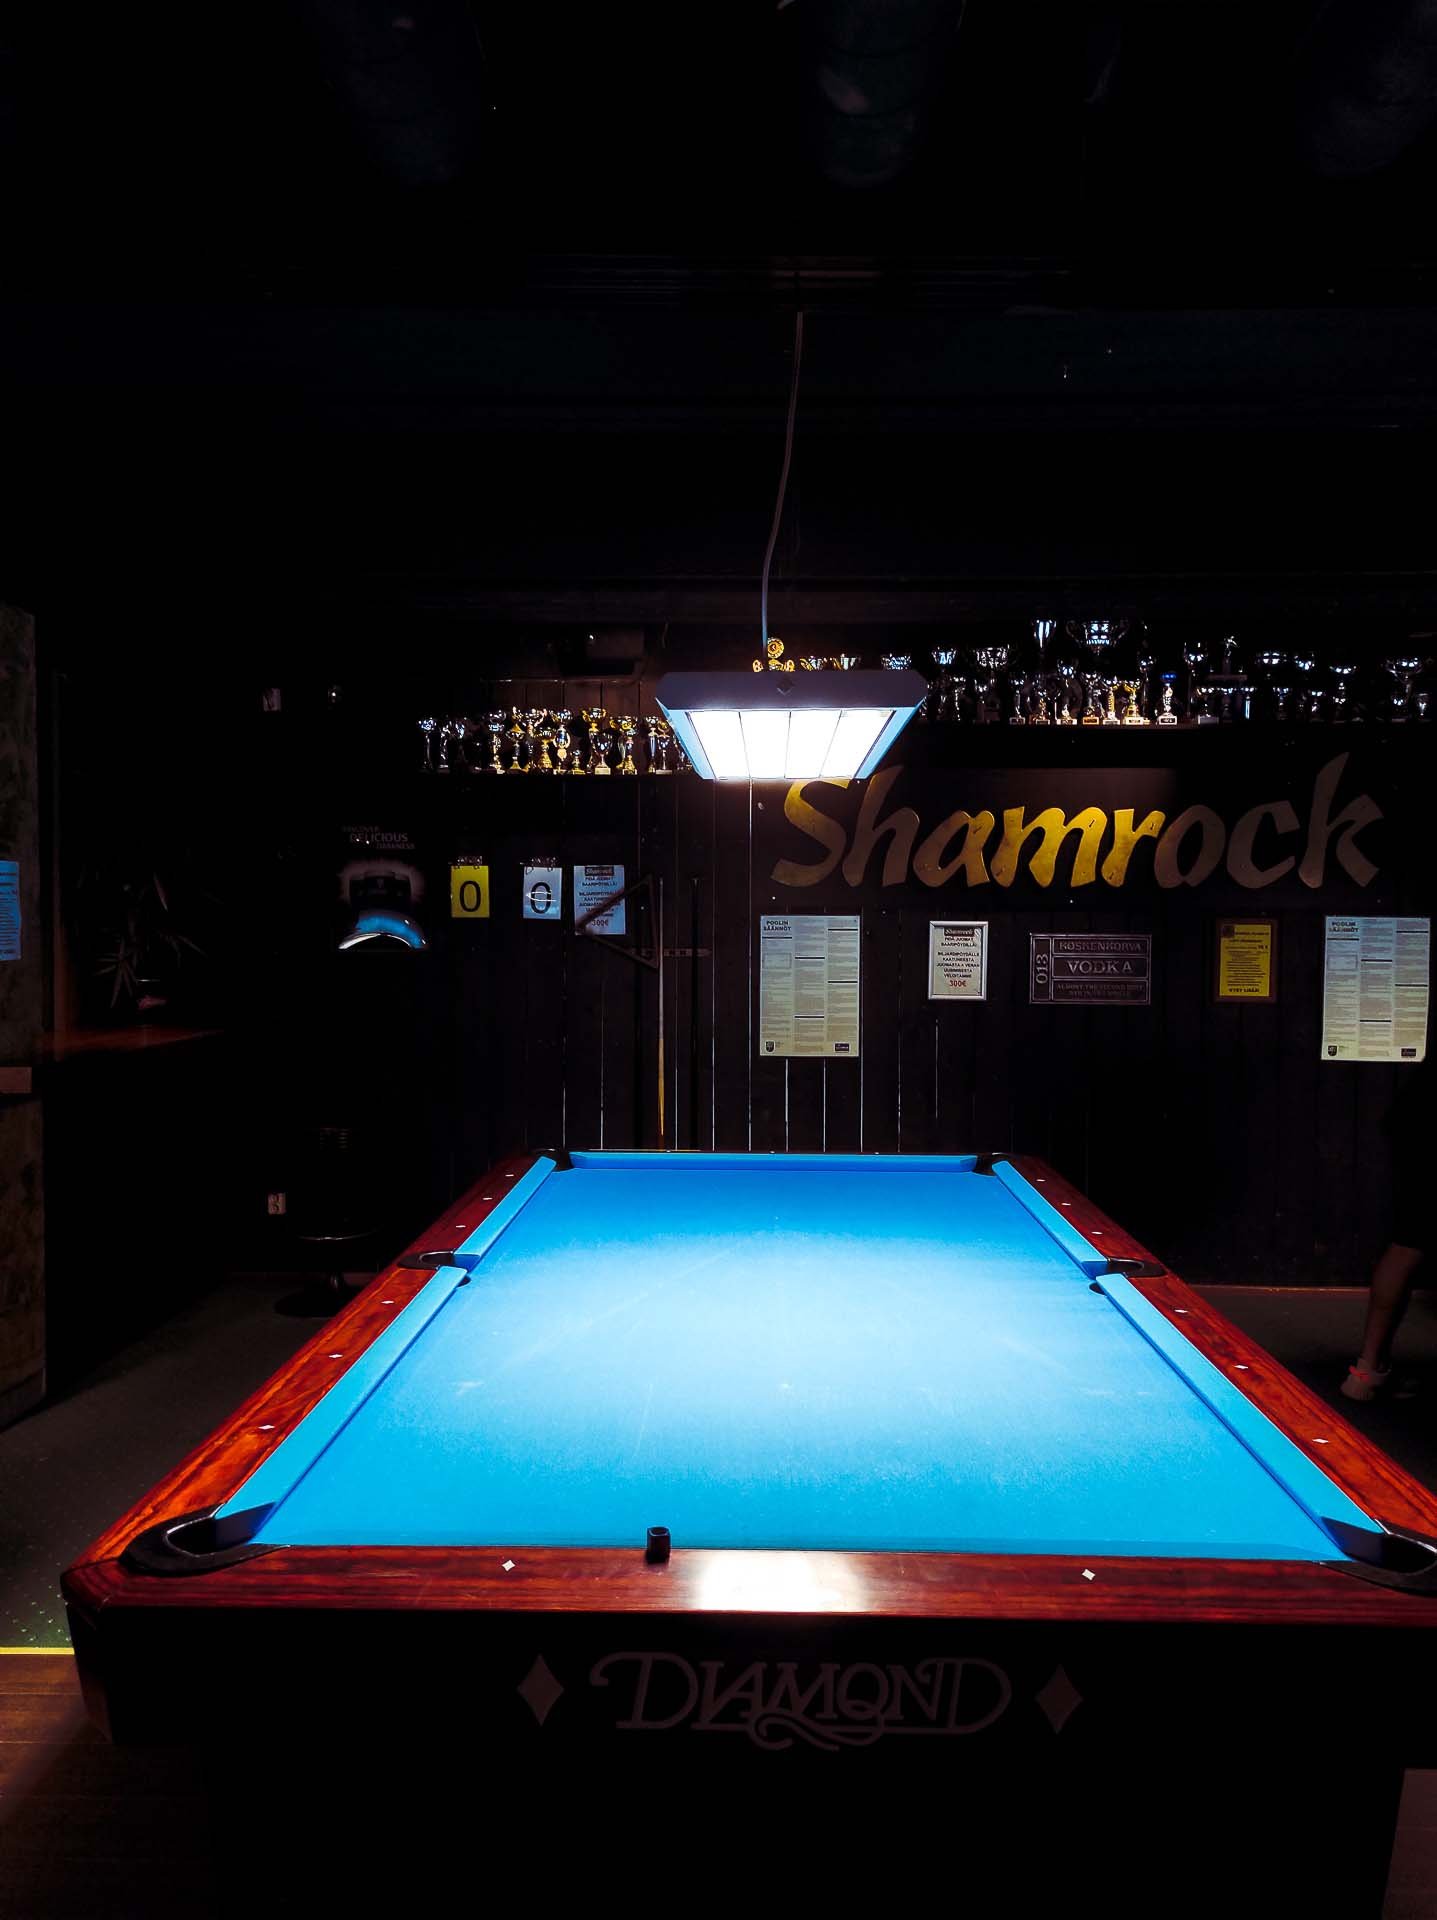 A billiard table with a lamp on top. In the background, the Shamrock logo.